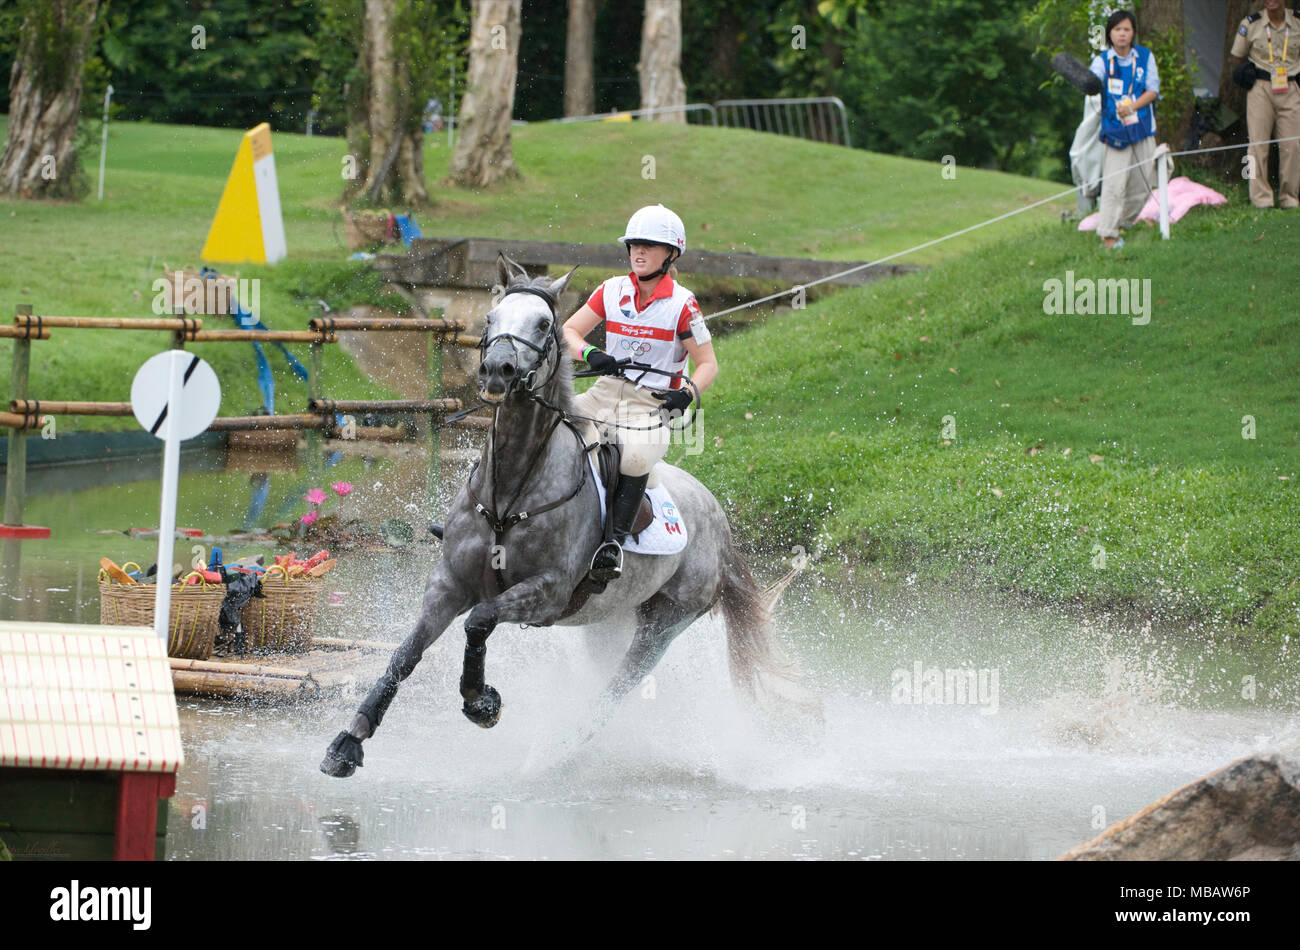 Olympic Games 2008, Hong Kong (Beijing Games) August 2008, Samantha Taylor (CAN) riding Livewire, eventing cross country Stock Photo